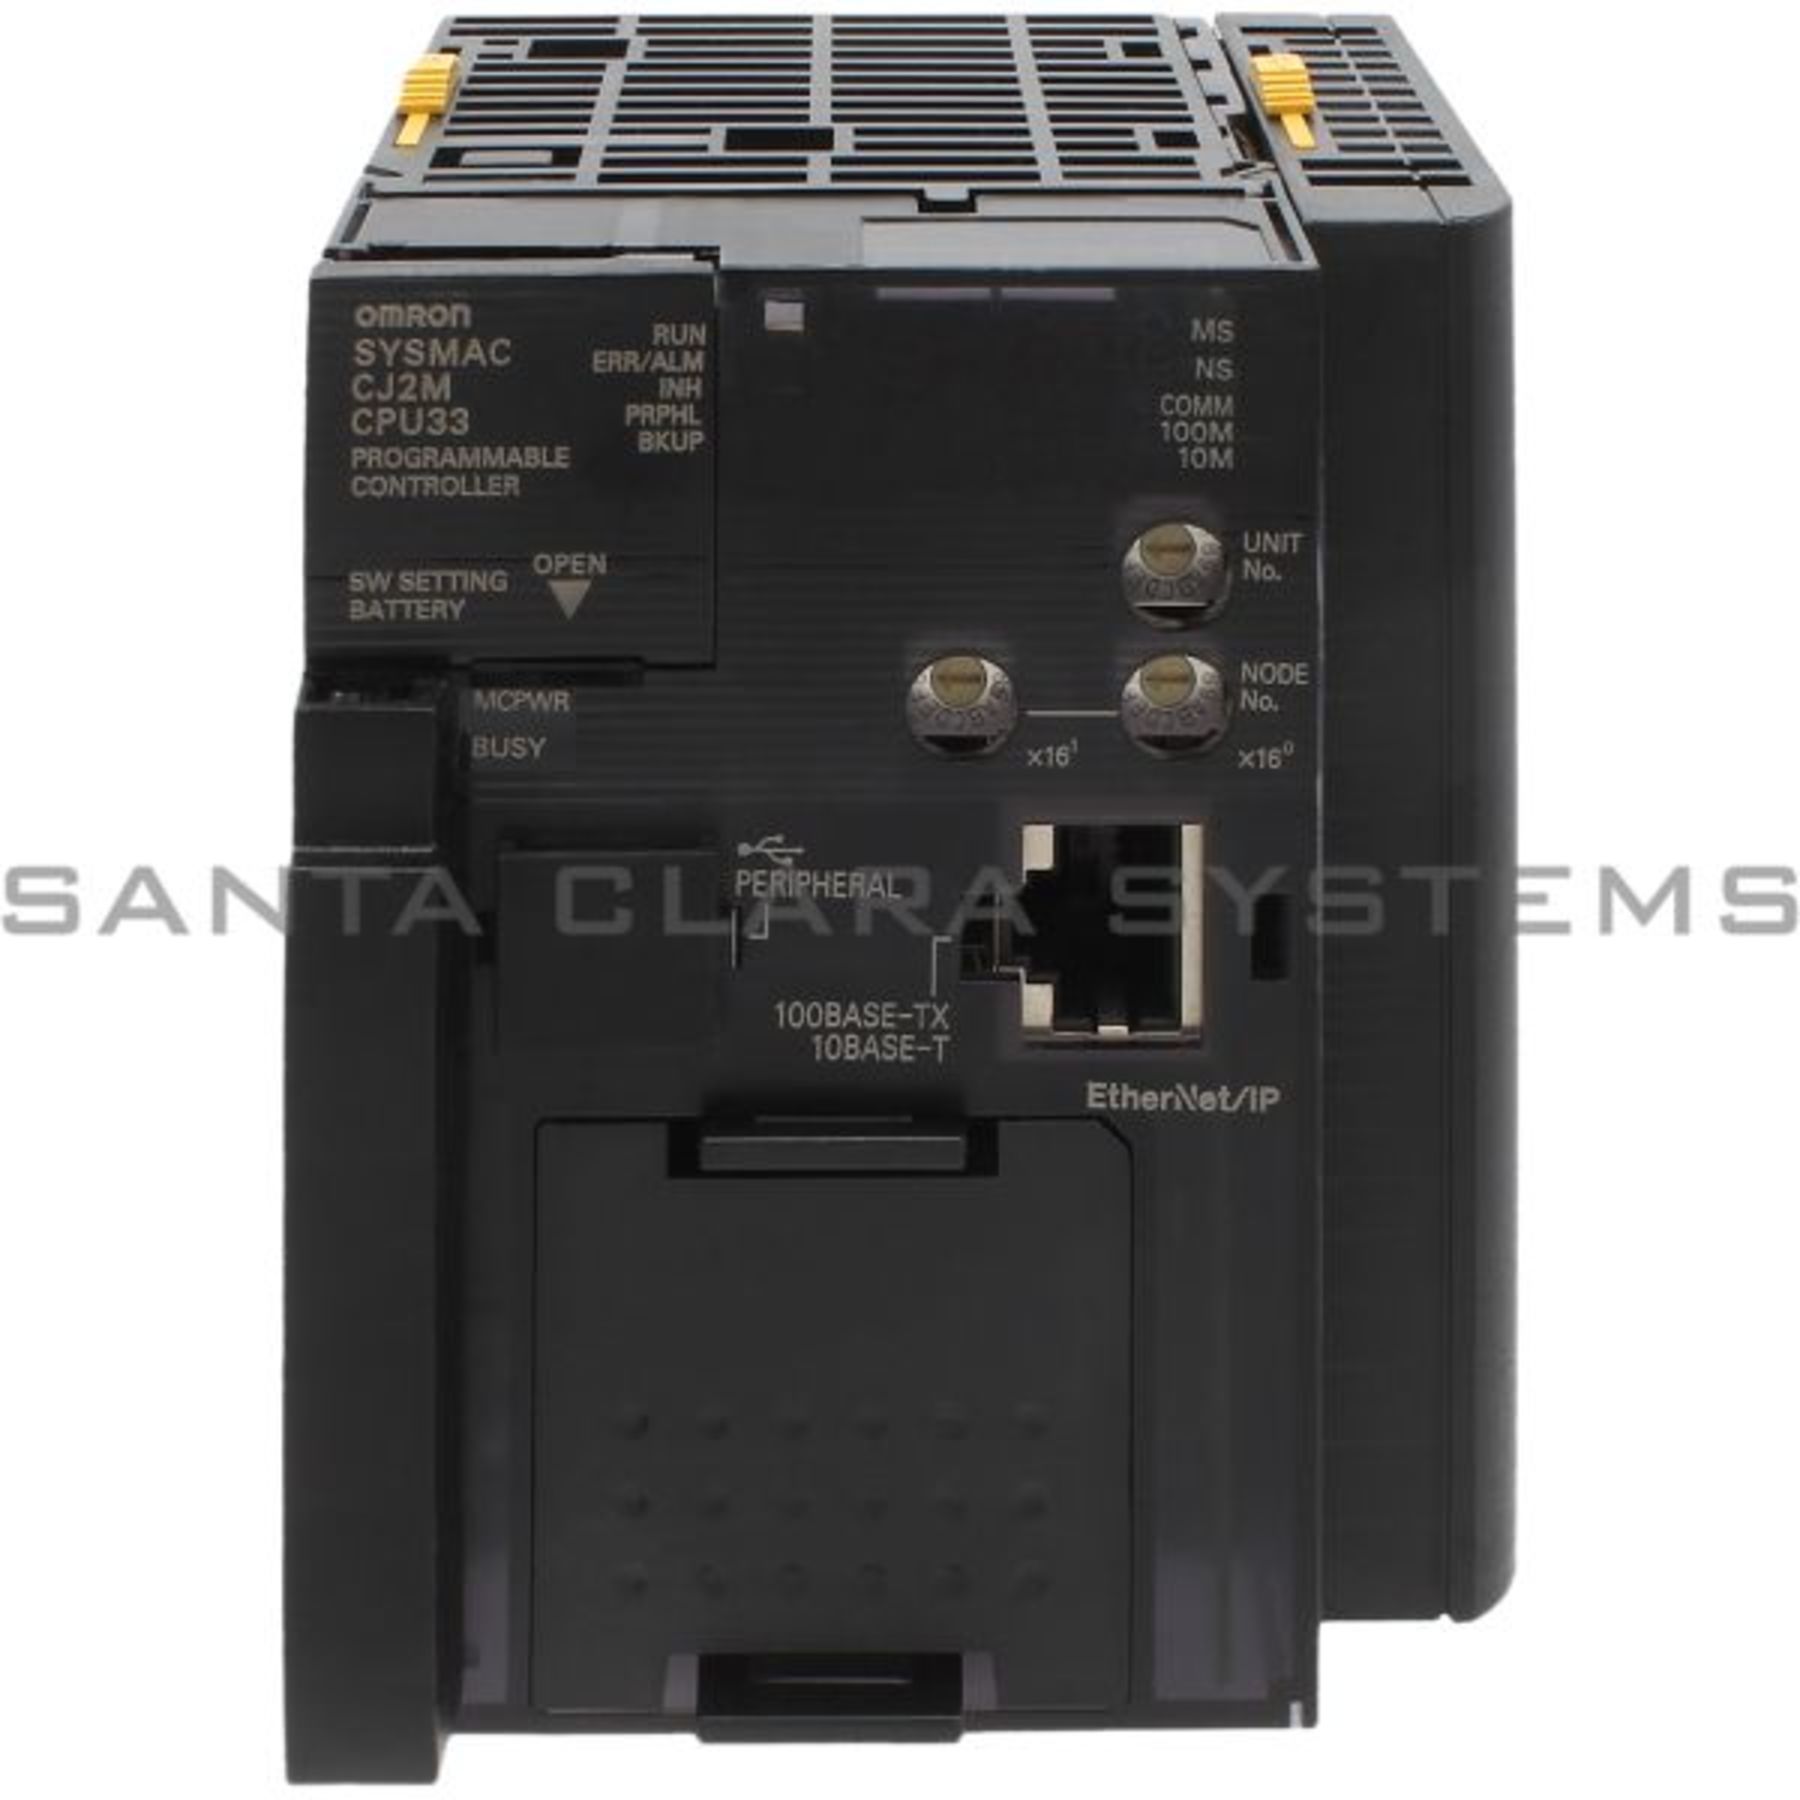 CJ2M-CPU33 Omron In stock and ready to ship - Santa Clara Systems